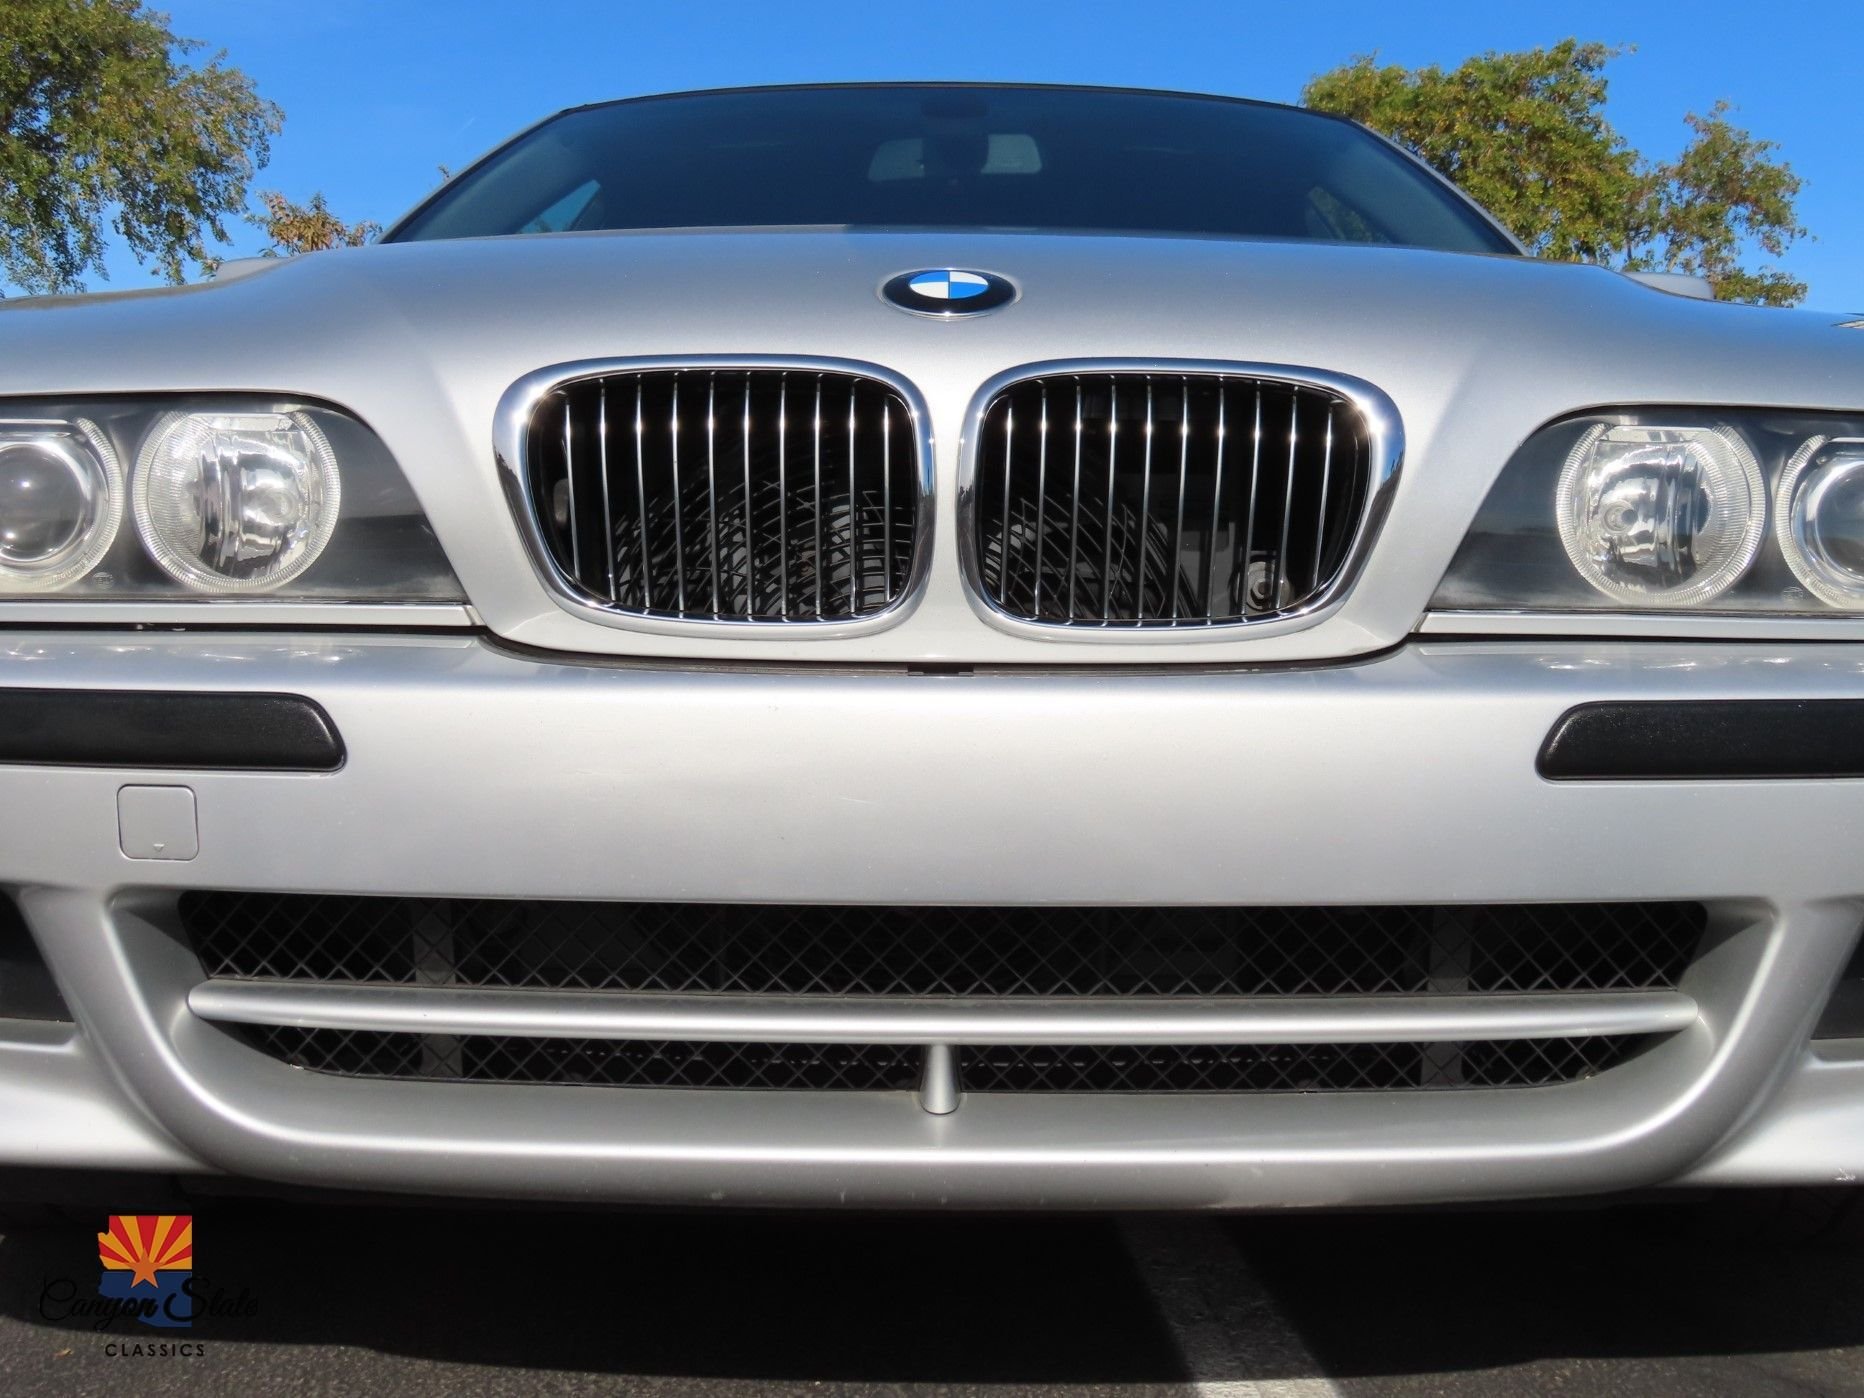 2003   BMW 5 Series 540i 4dr Sdn 6-Spd Manual - Canyon State Classics